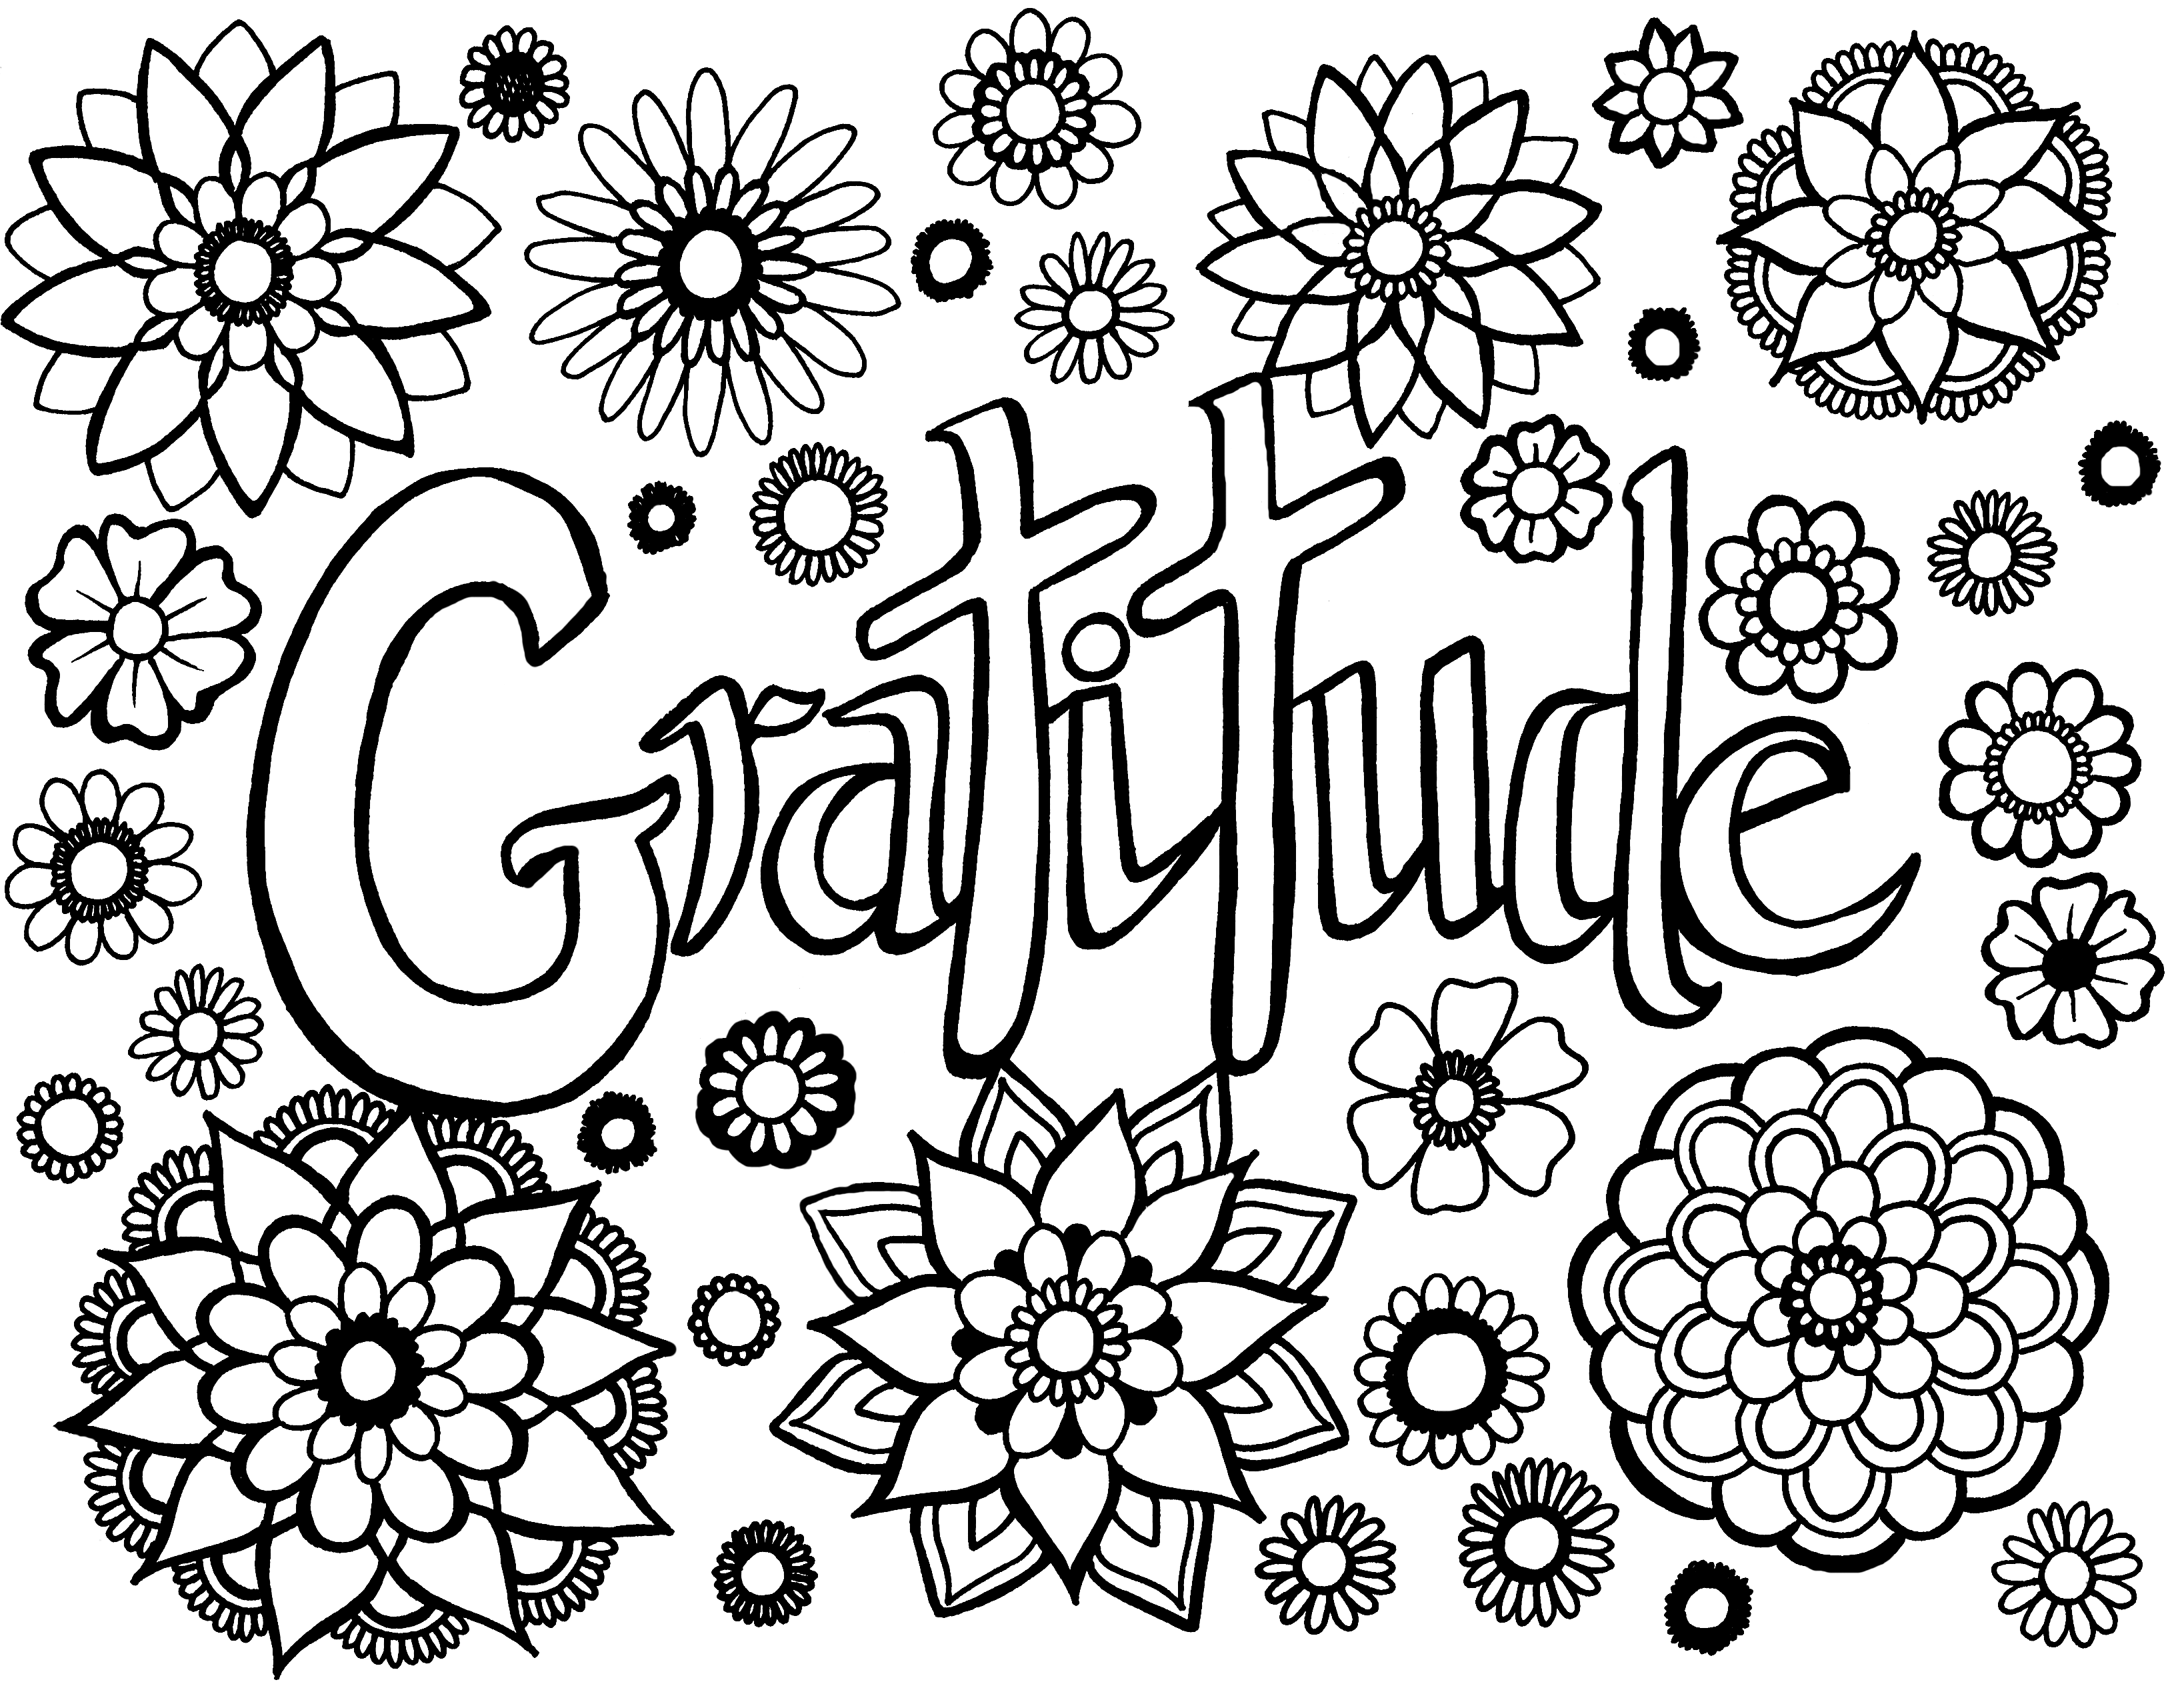 gratitude-coloring-coloring-pages